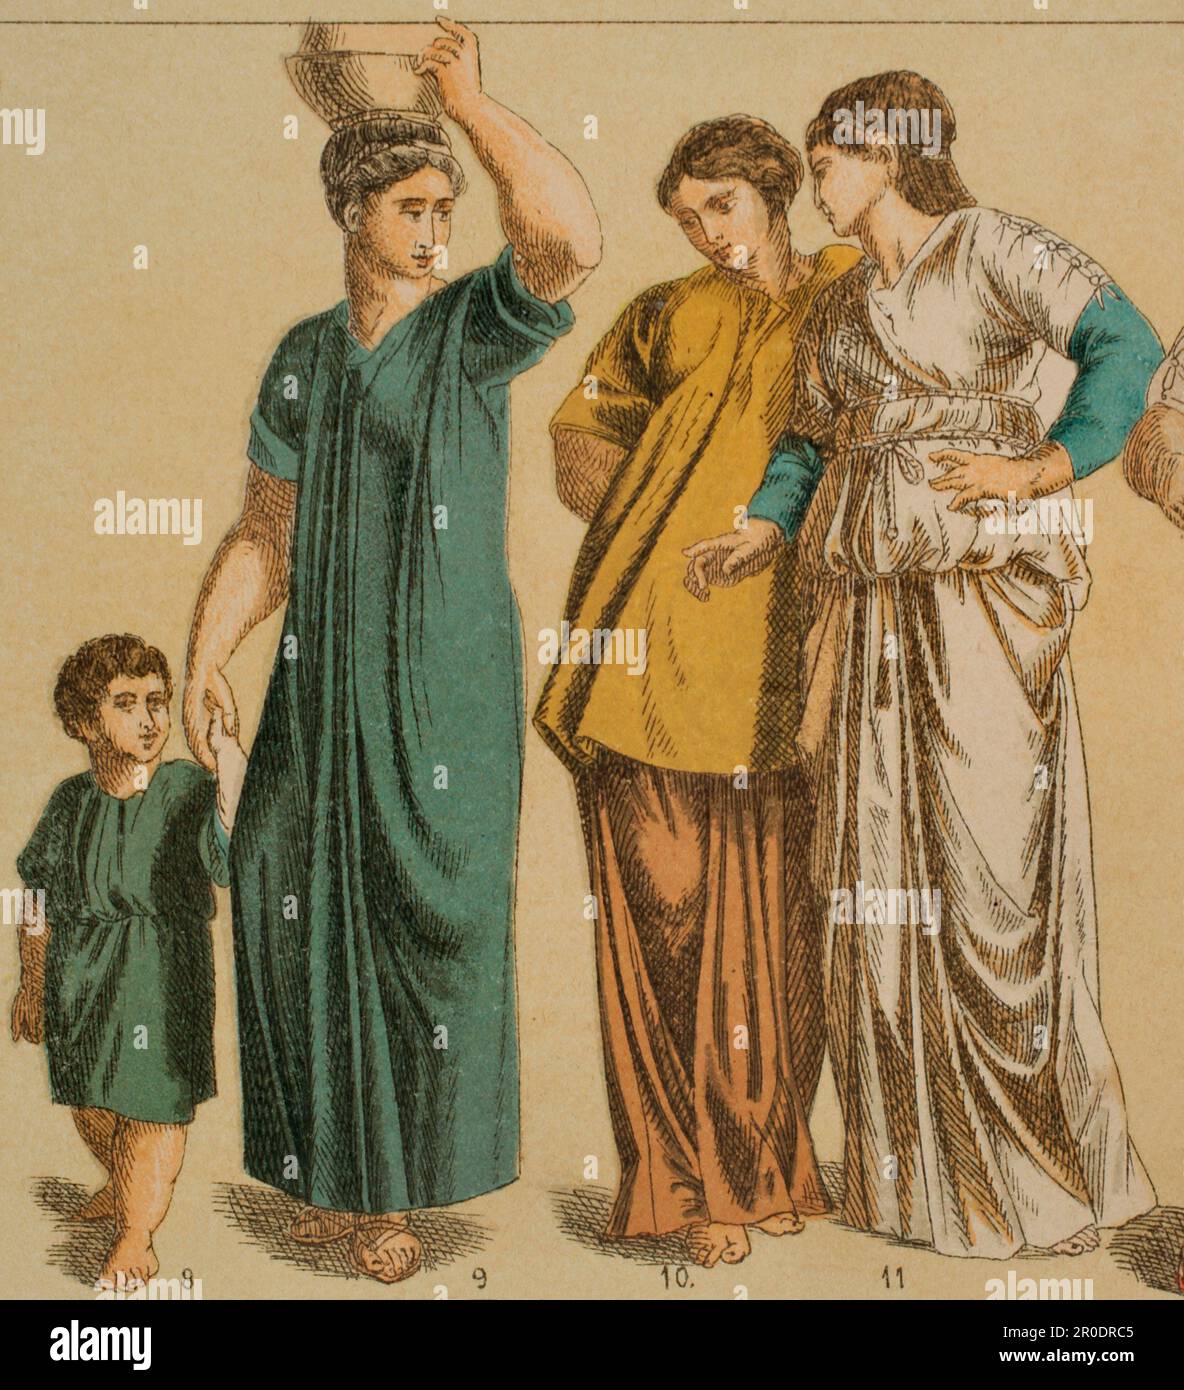 Roman Age. Costume. From left to right: 8- Boy in short-sleeved tunic, 9- Roman inner tunic, 10- Roman jacket for young people, 11- Roman woman's stole. Chromolithography. 'Historia Universal' by César Cantú. Volume II, 1881. Stock Photo